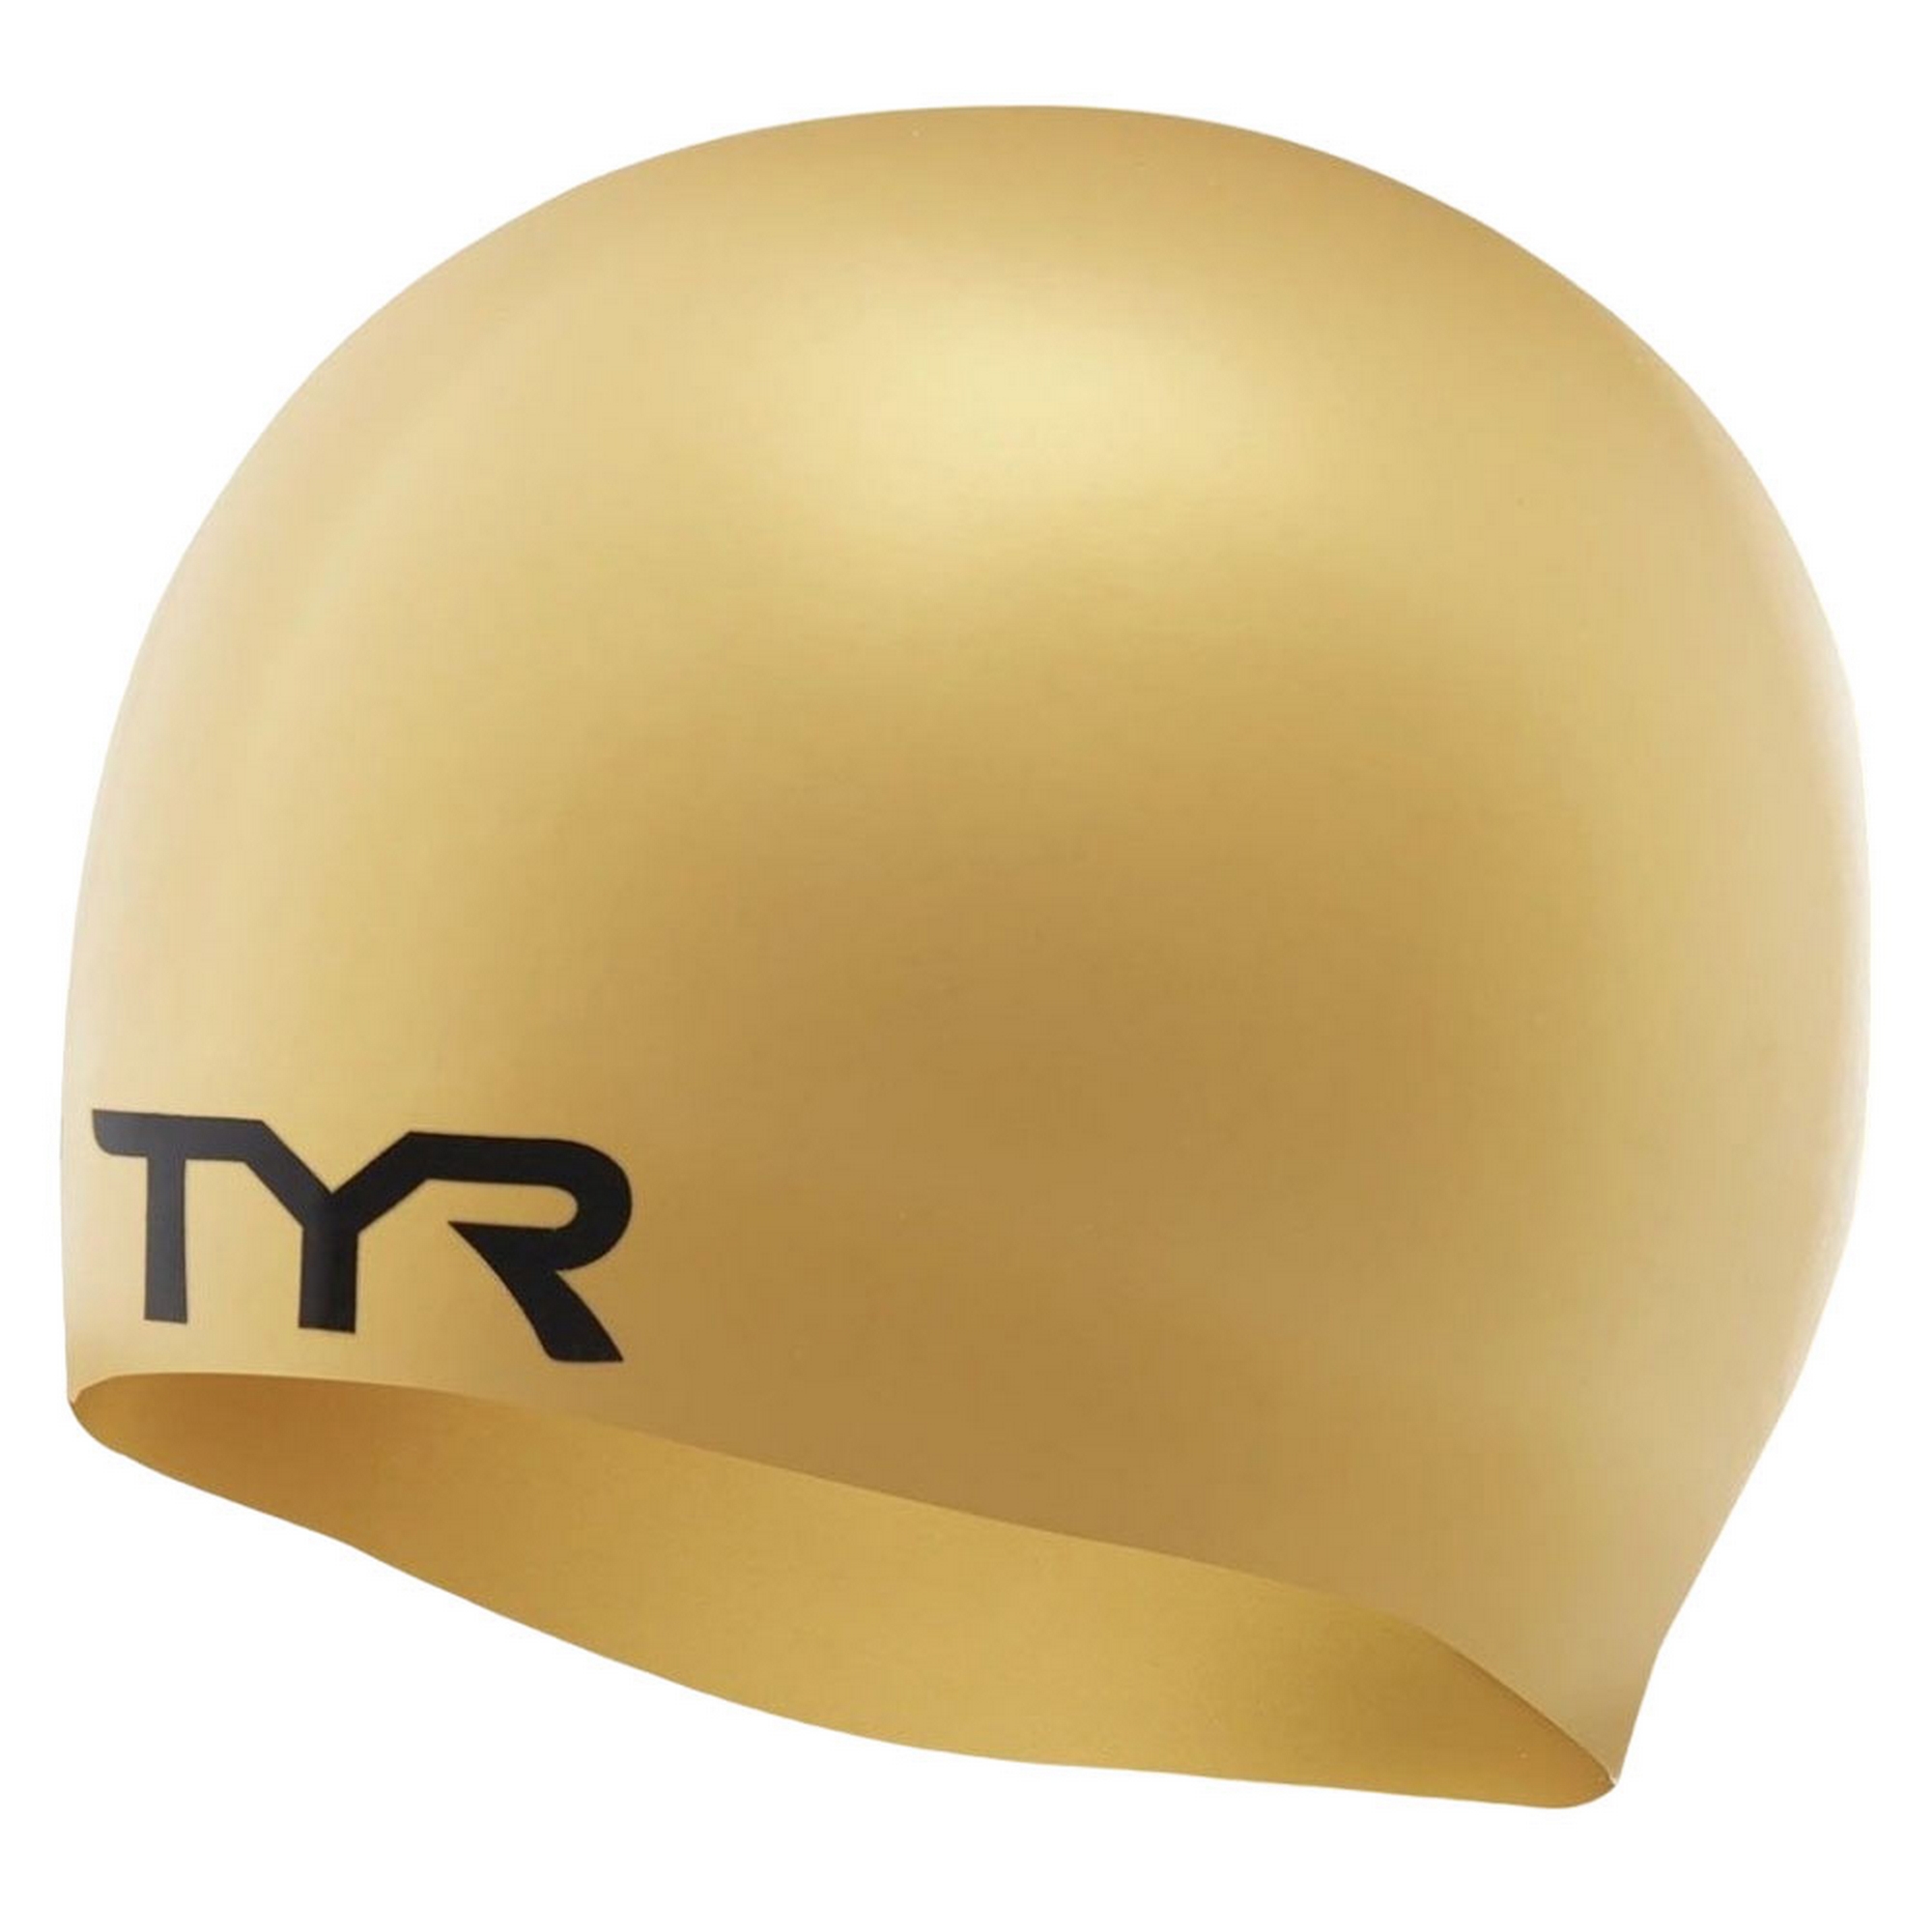    TYR Wrinkle Free Silicone Cap LCS-710 